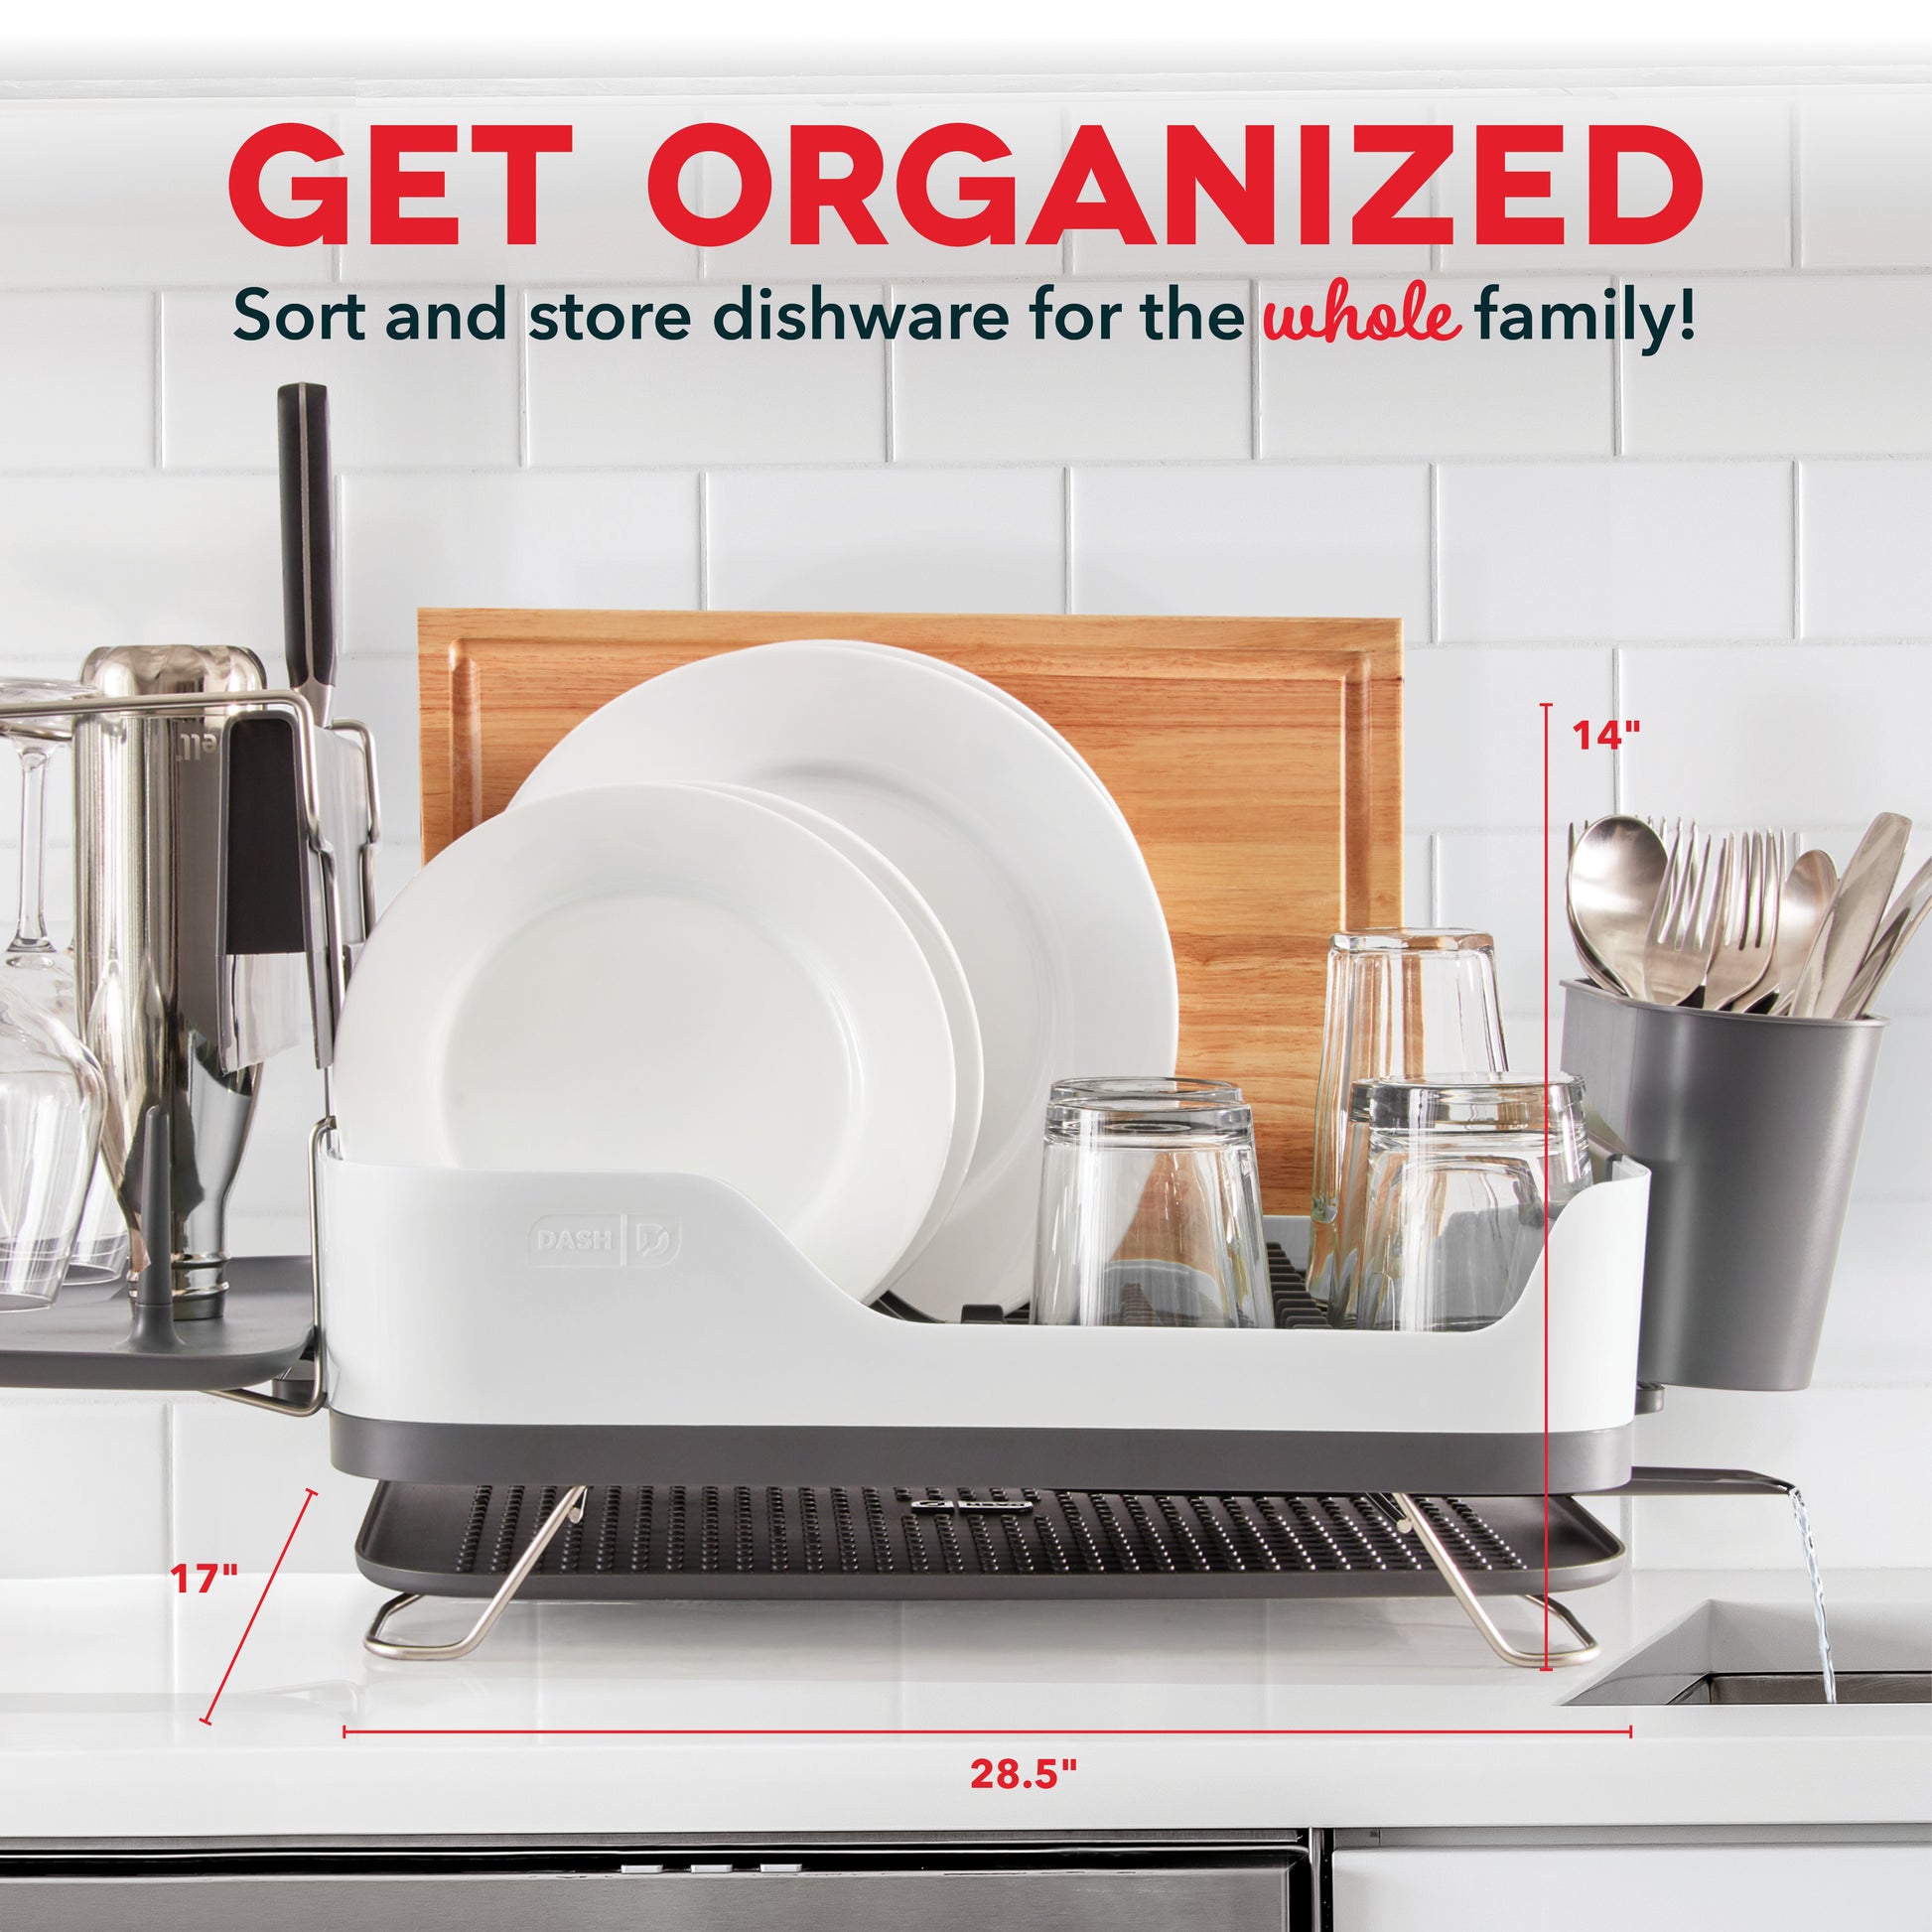 16 Simple Space-Saving Ideas For Your Home  Plate storage, Dish rack drying,  Clever storage